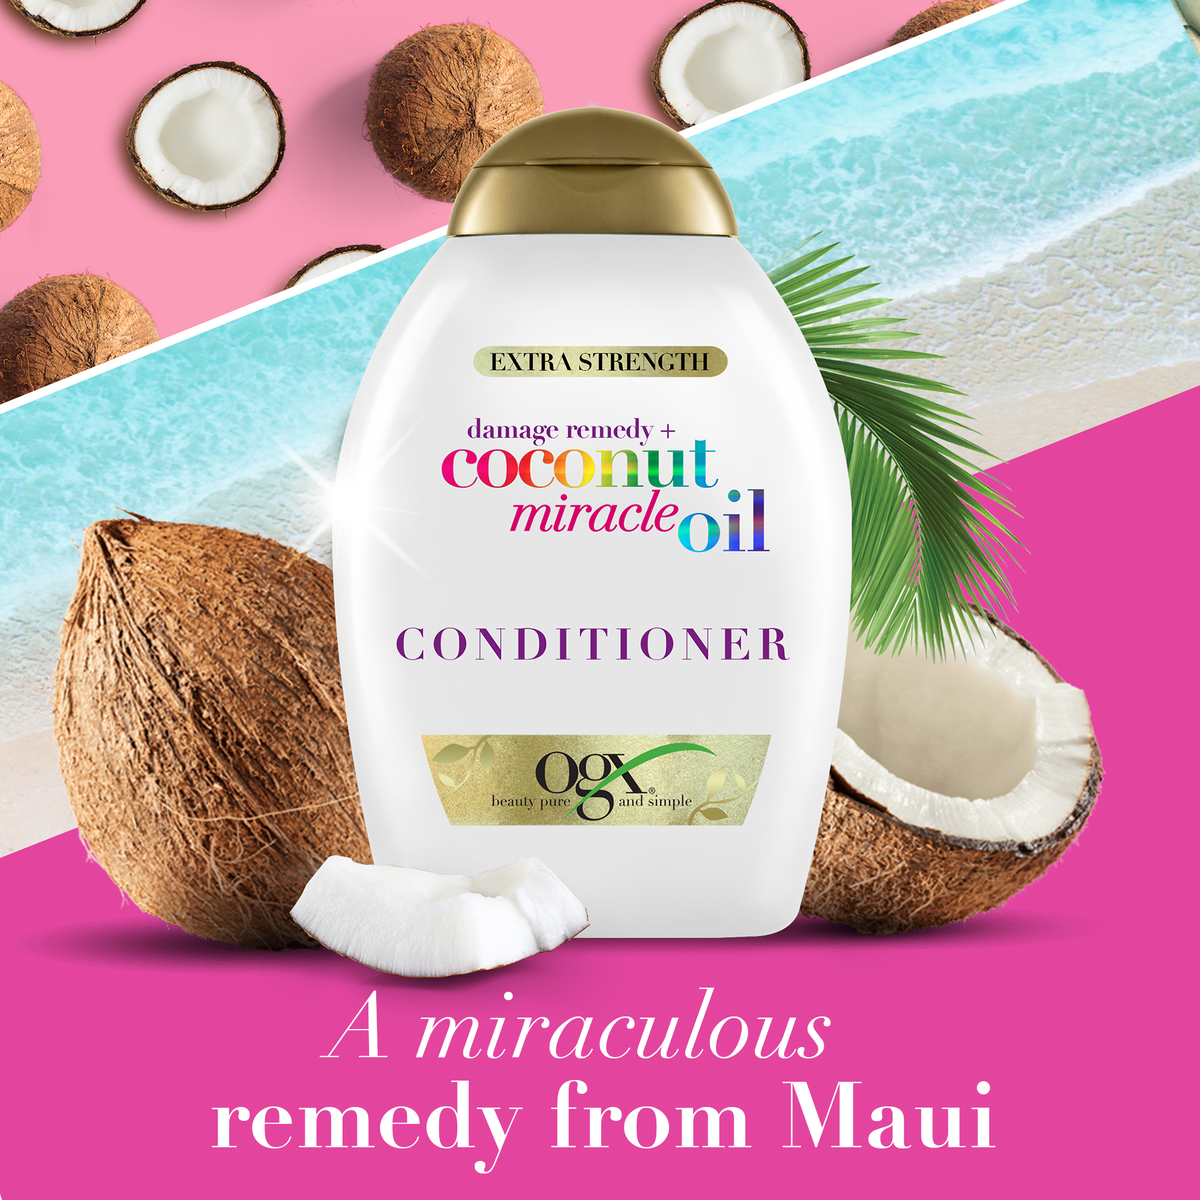 Ogx Conditioner Damage Remedy + Coconut Miracle Oil 385 ml